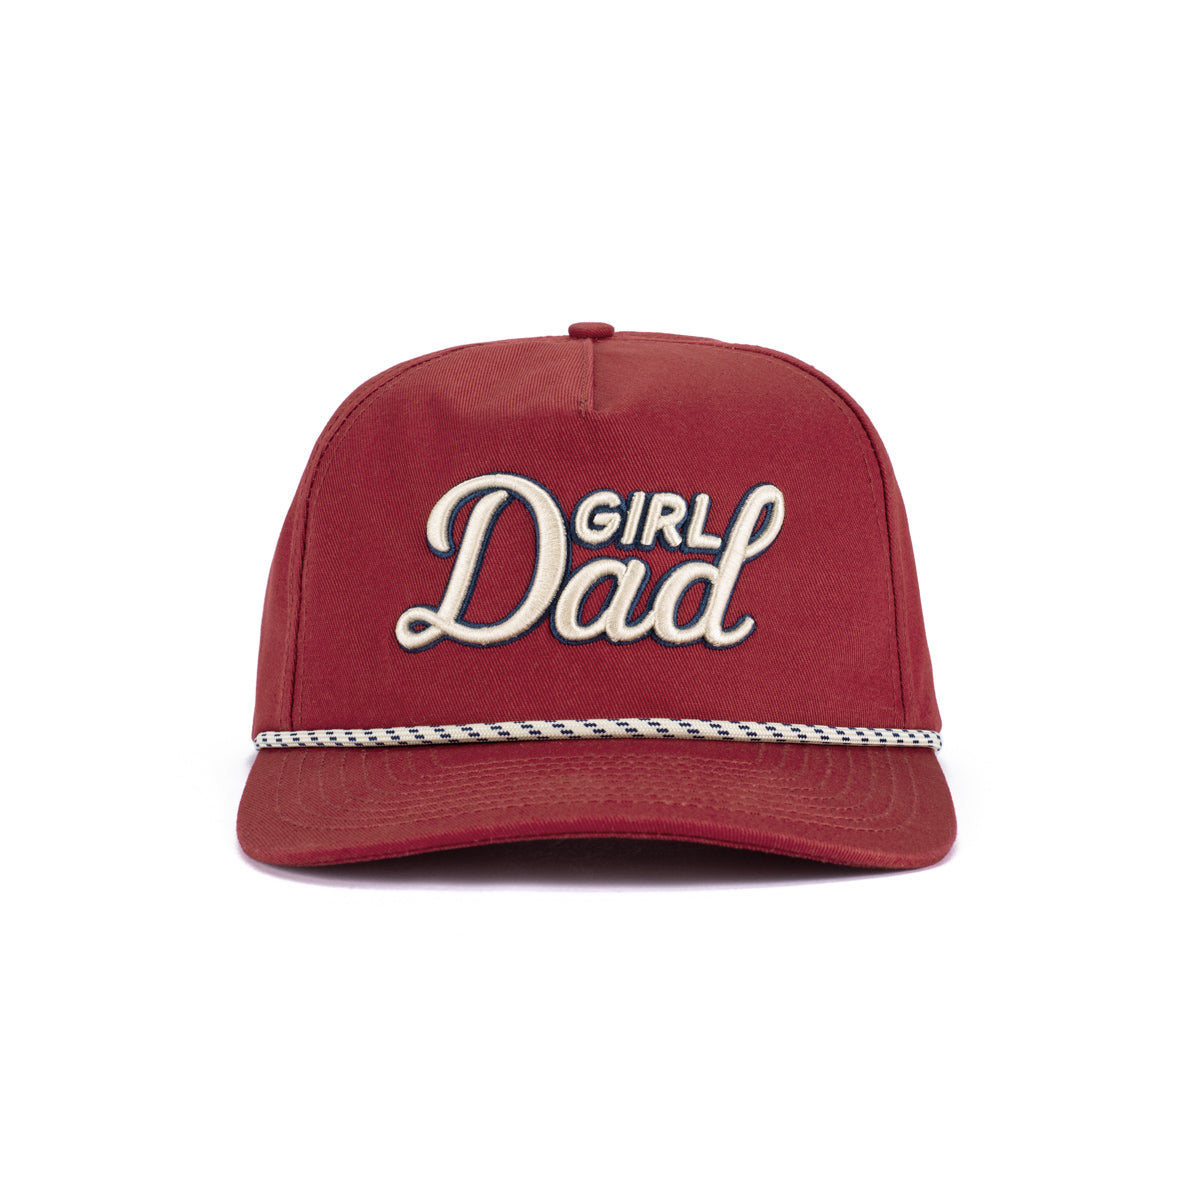 Girl Dad Retro Rope Hat-Hats-Bussin With The Boys-Red-One Size-Barstool Sports